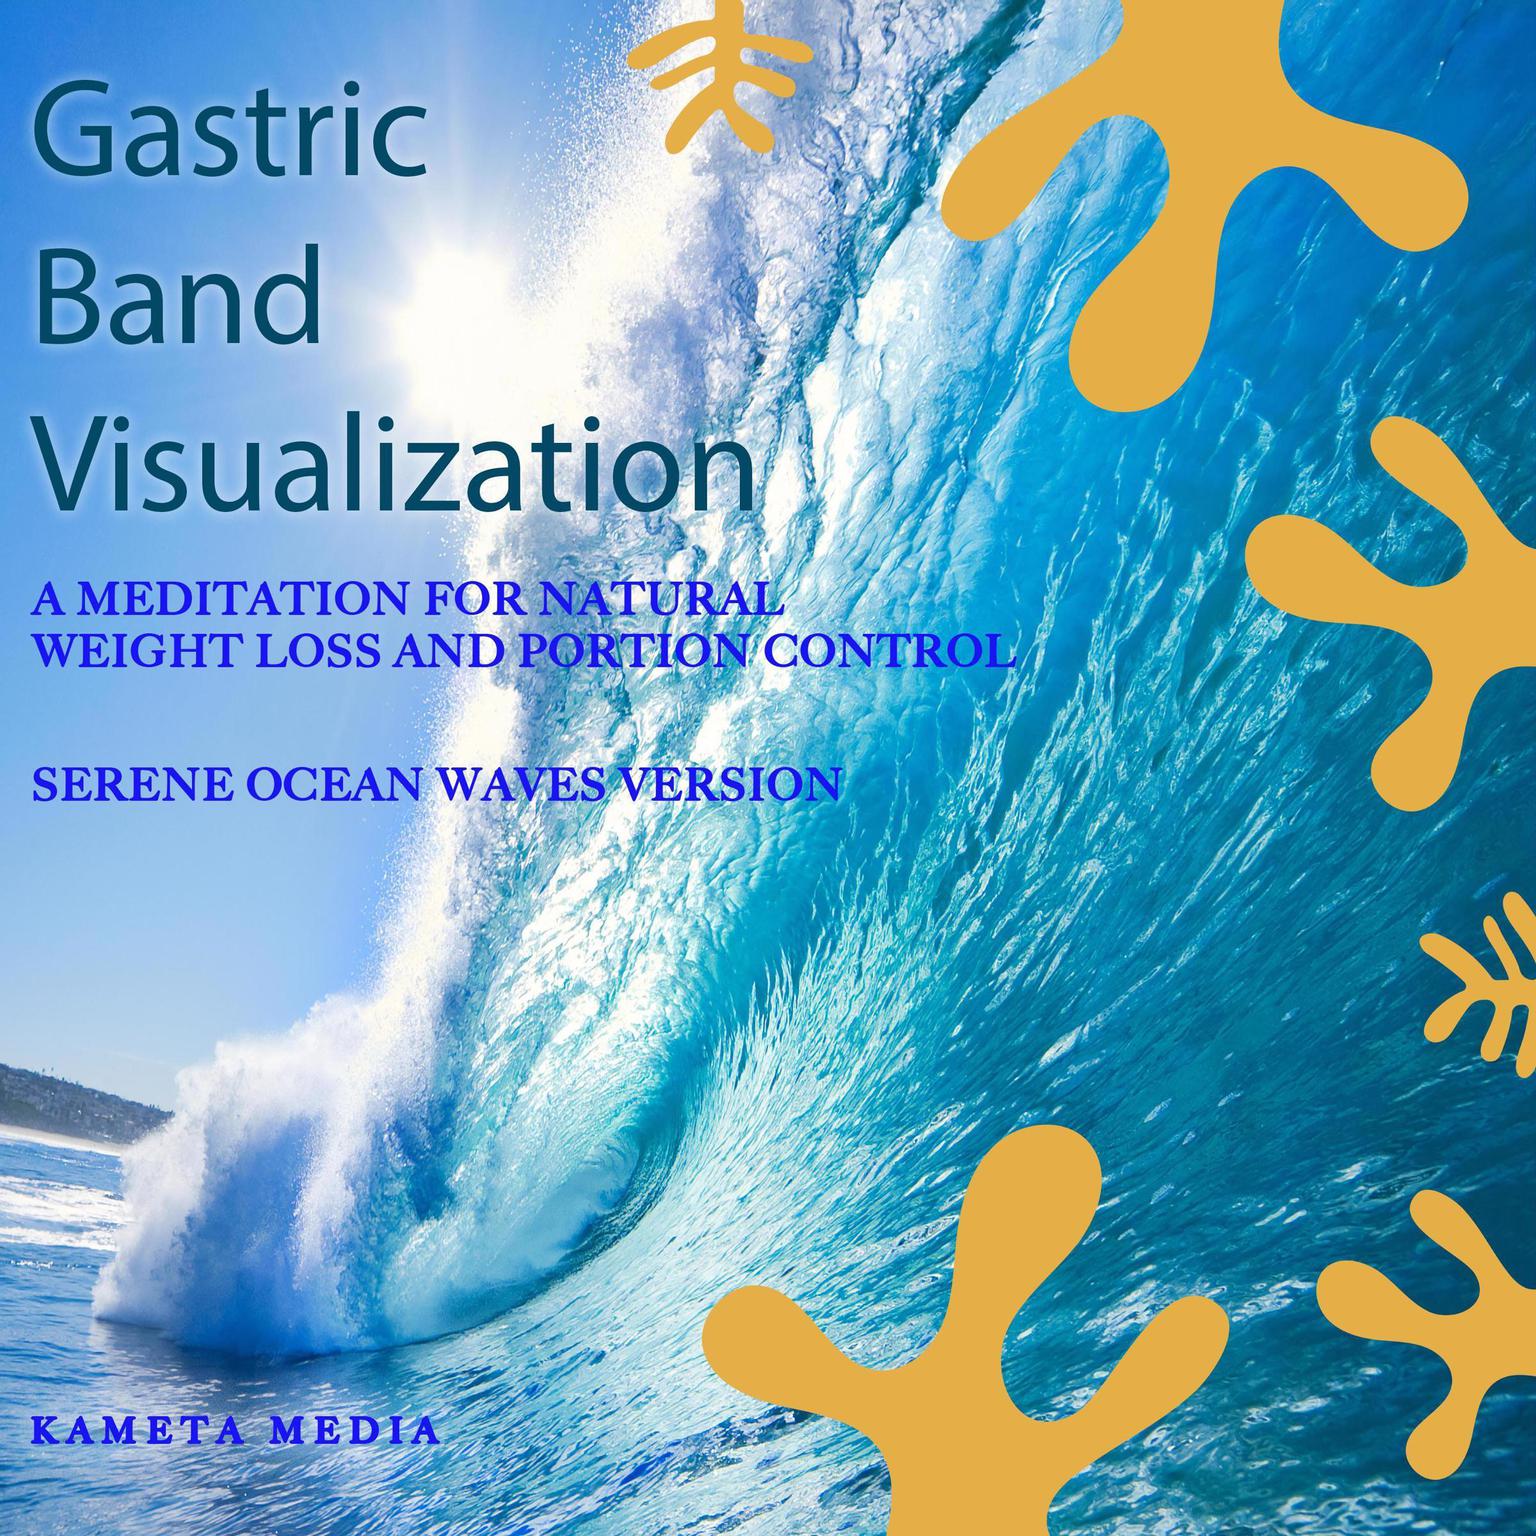 Gastric Band Visualization: A Meditation for Natural Weight Loss and Portion Control (Serene Ocean Waves Version) Audiobook, by Kameta Media